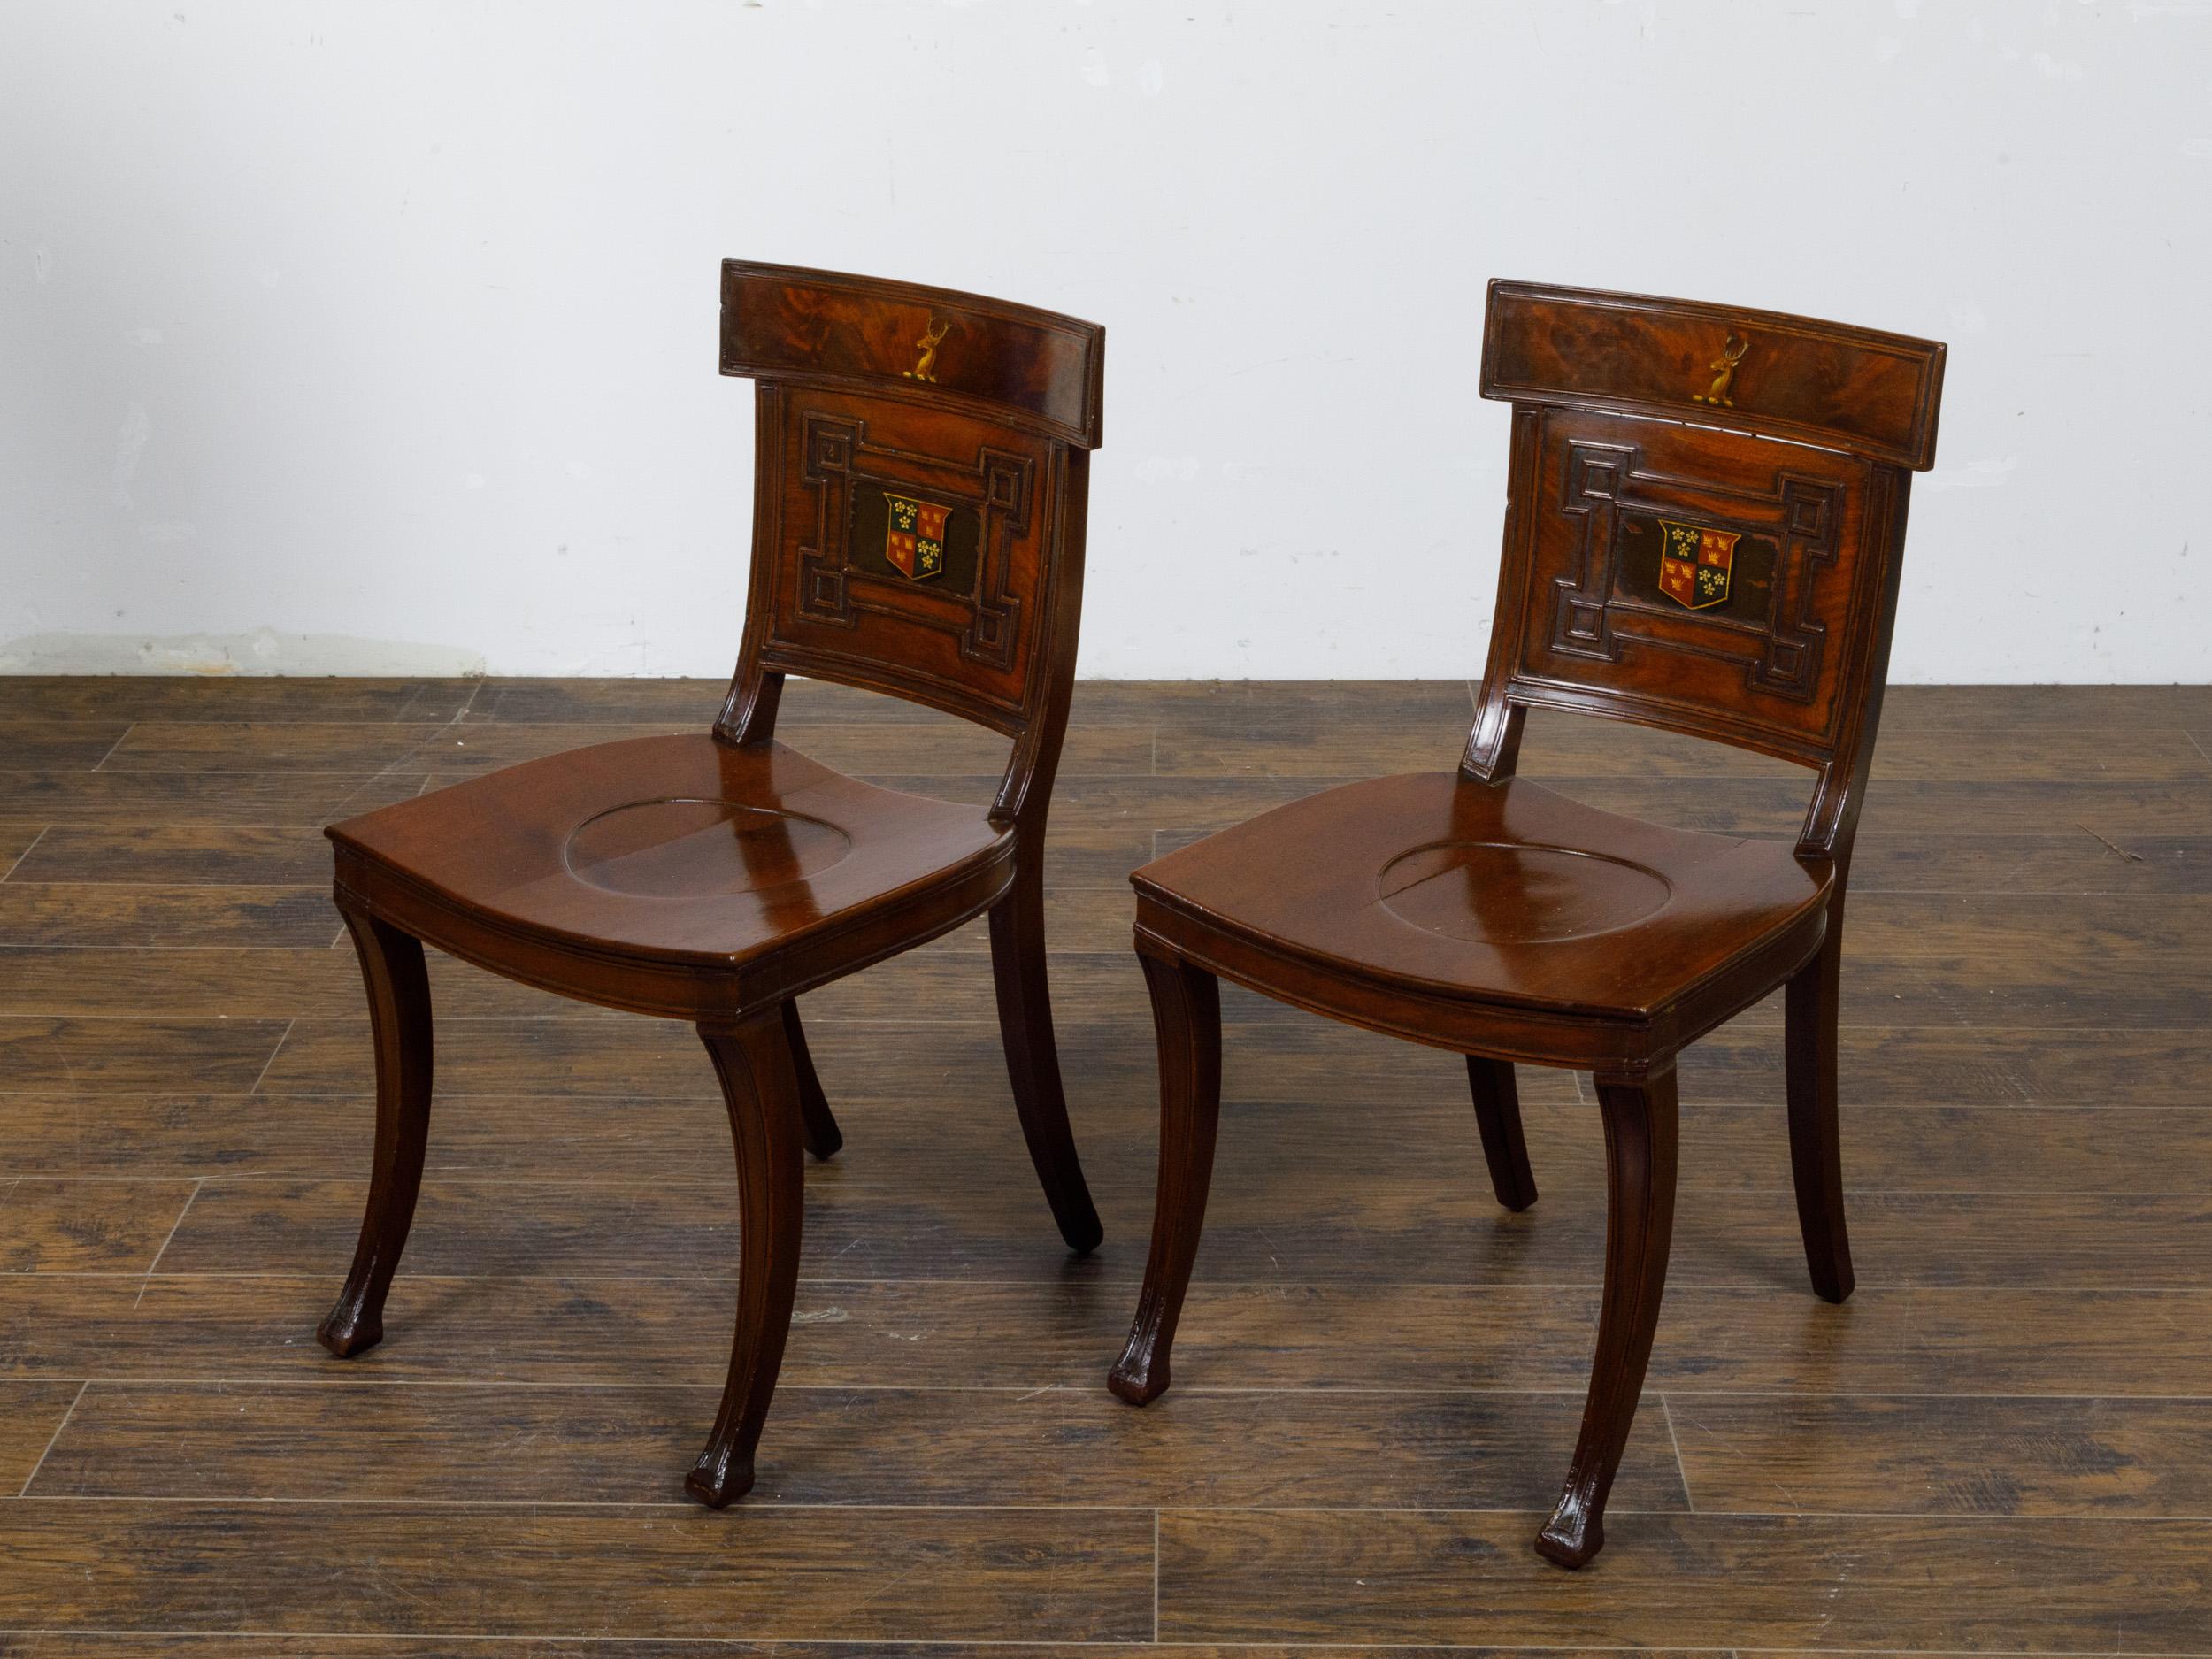 A pair of English Regency mahogany hall chairs from the 19th century with coat of arms, dished seats and saber legs. These English Regency mahogany hall chairs from the 19th century are a testament to the elegance and refinement of the period.